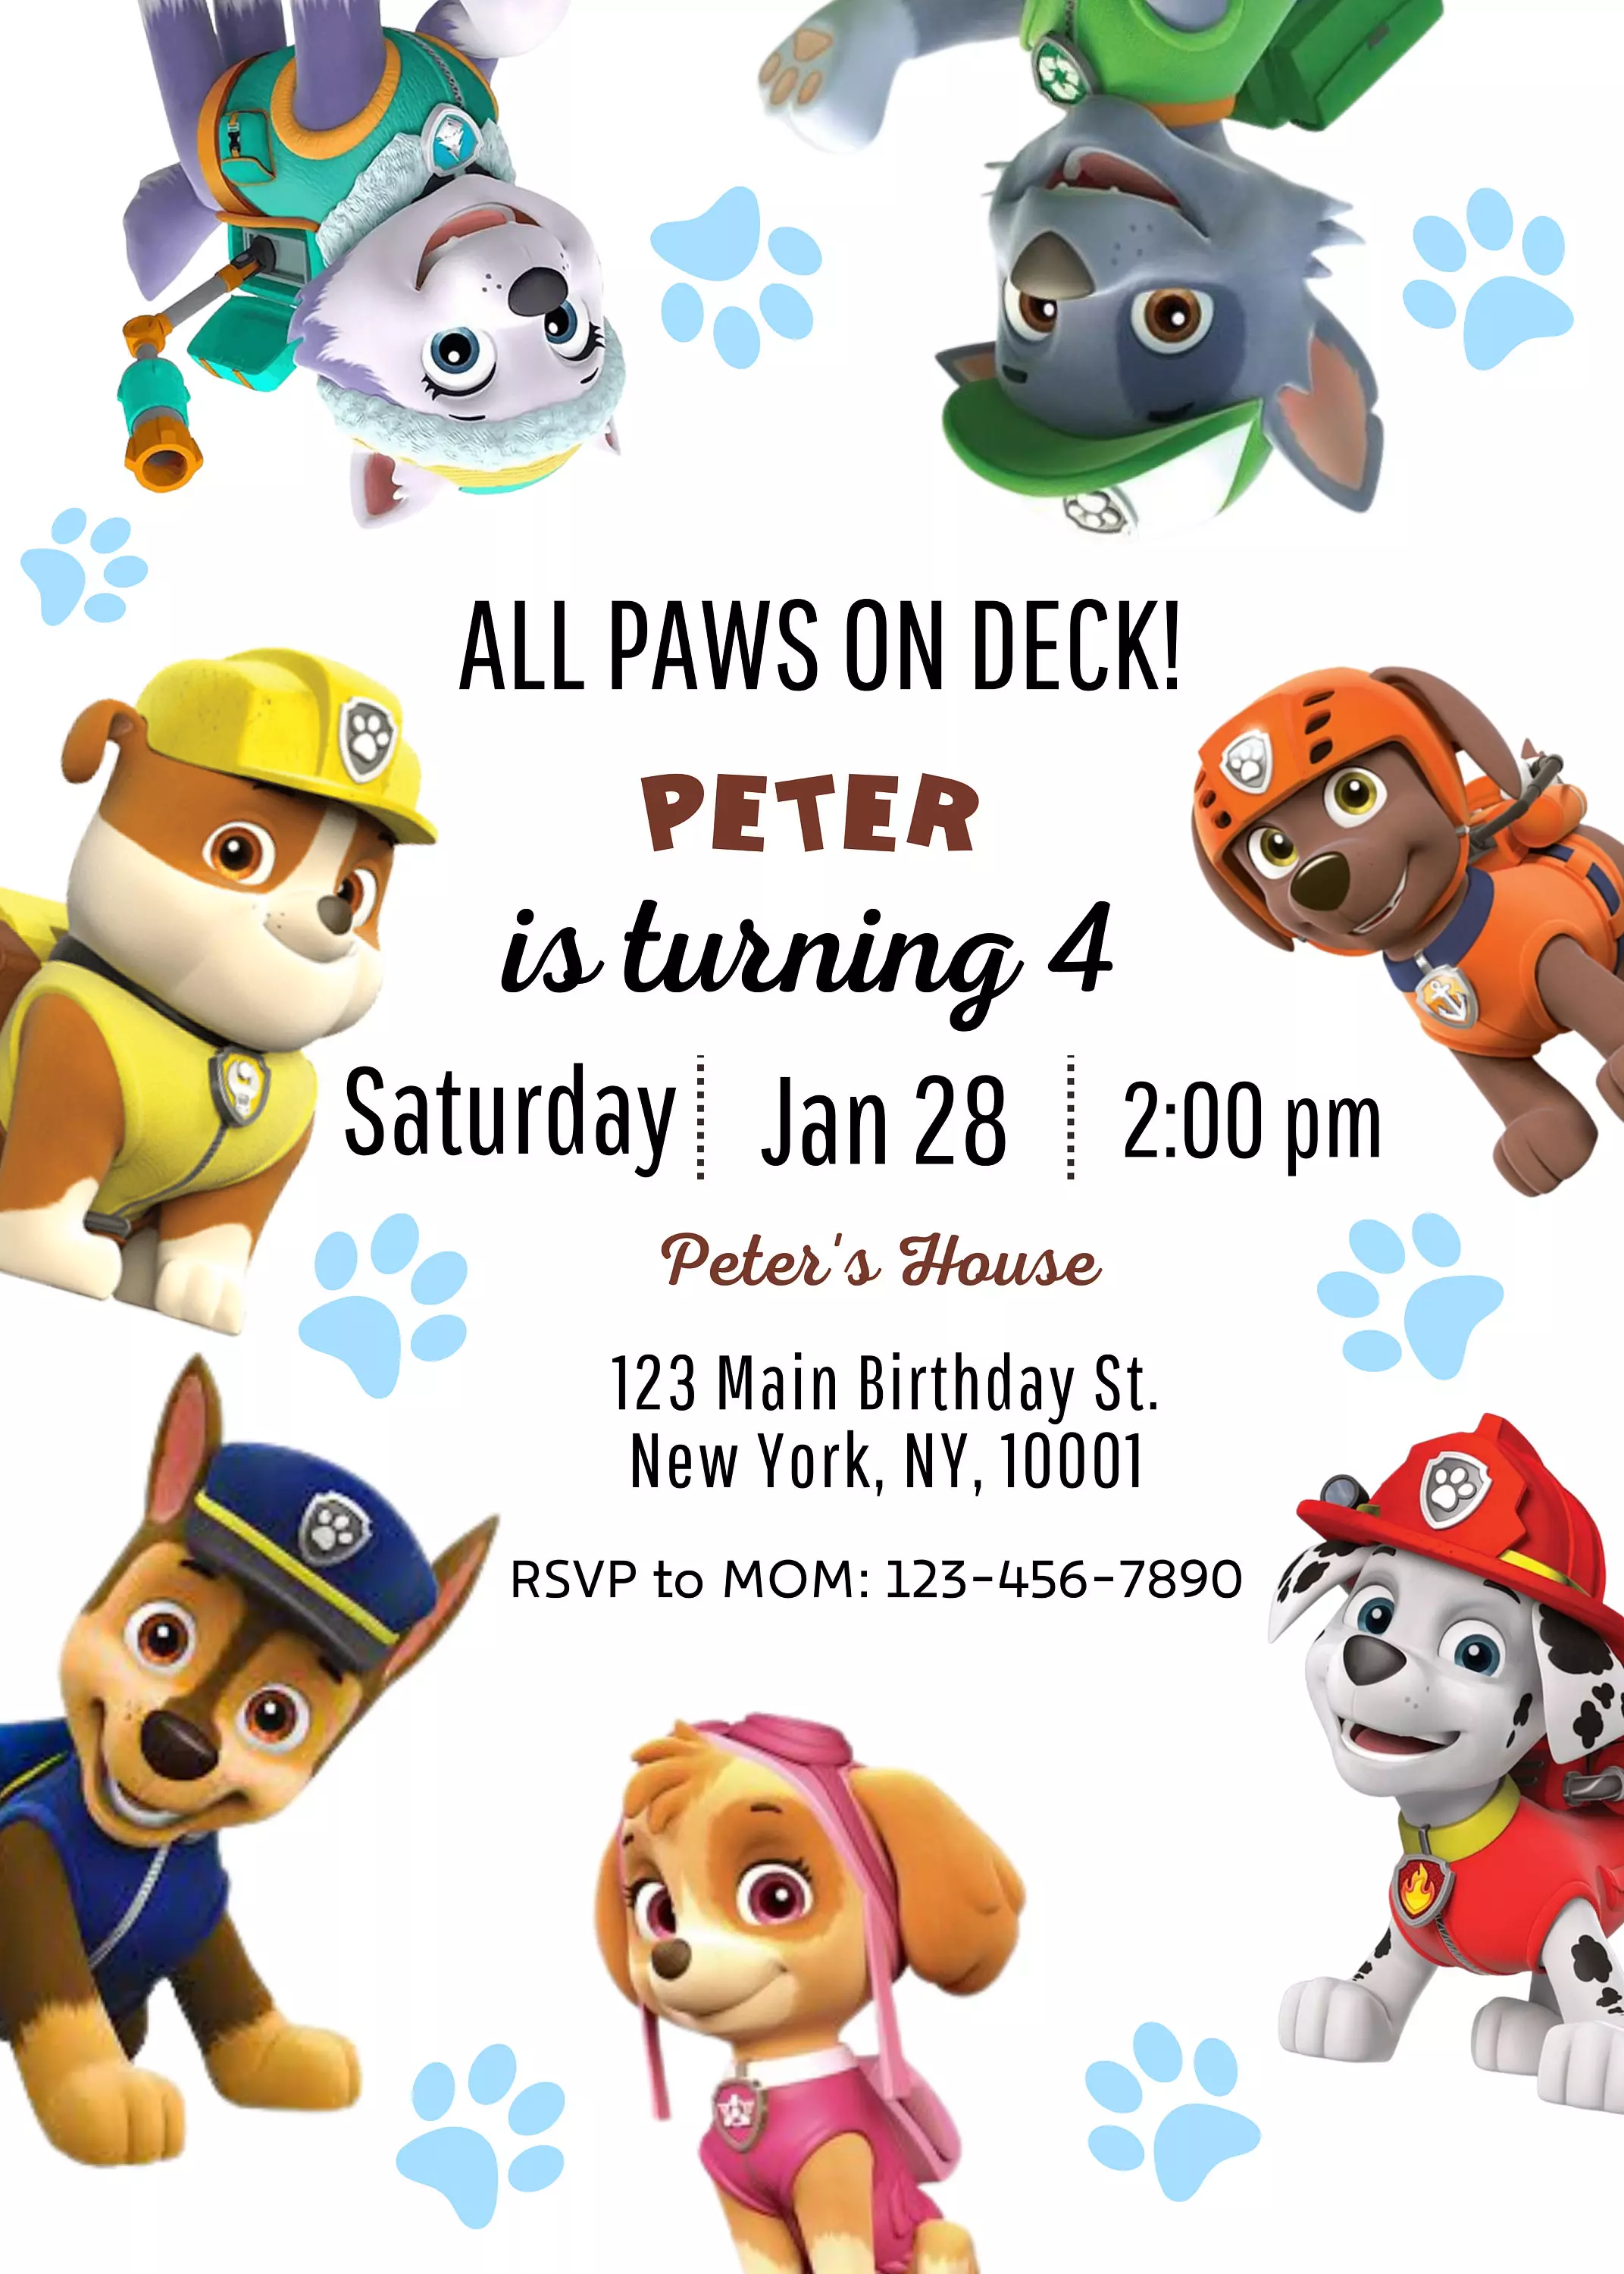 Paw Patrol birthday party - Mighty pups